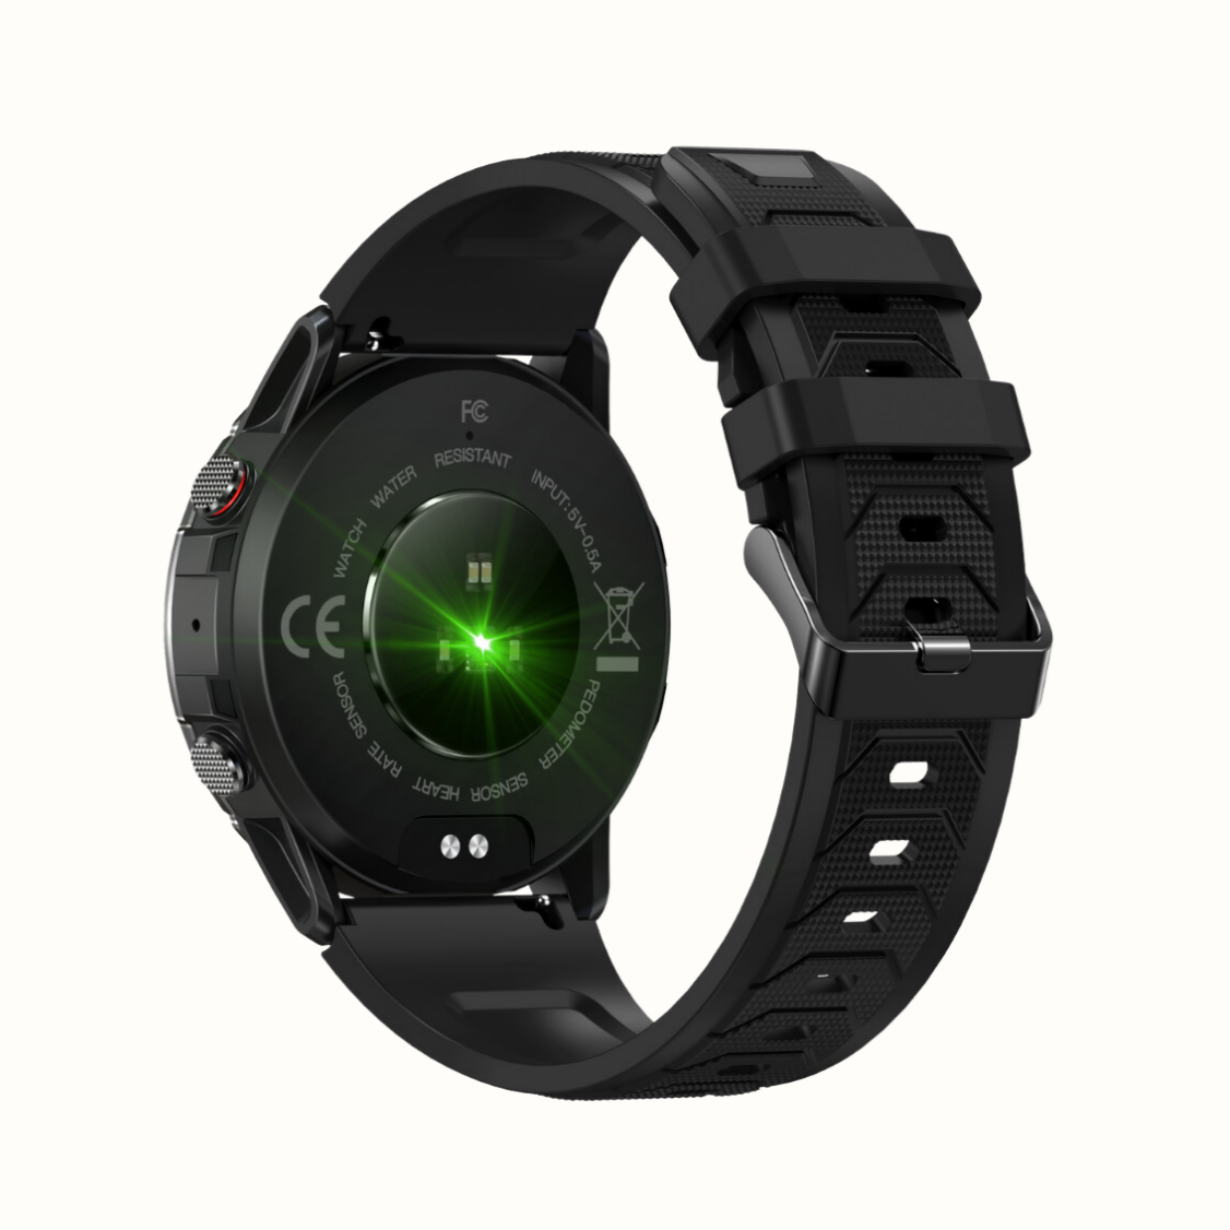 NX10 Sport Smartwatch, AMOLED Display, Setup with Android device, Setup with Apple Device, Water resistance - IP68, Best Smart Watch, 2023, Track Activity,Track WOmens Health, Pedometer, Calorie Monitor, Sleep Tracking, Heart Rate Monitor, Blood Oxygen Monitor- Spo2, Multisport Mode, Color - Black